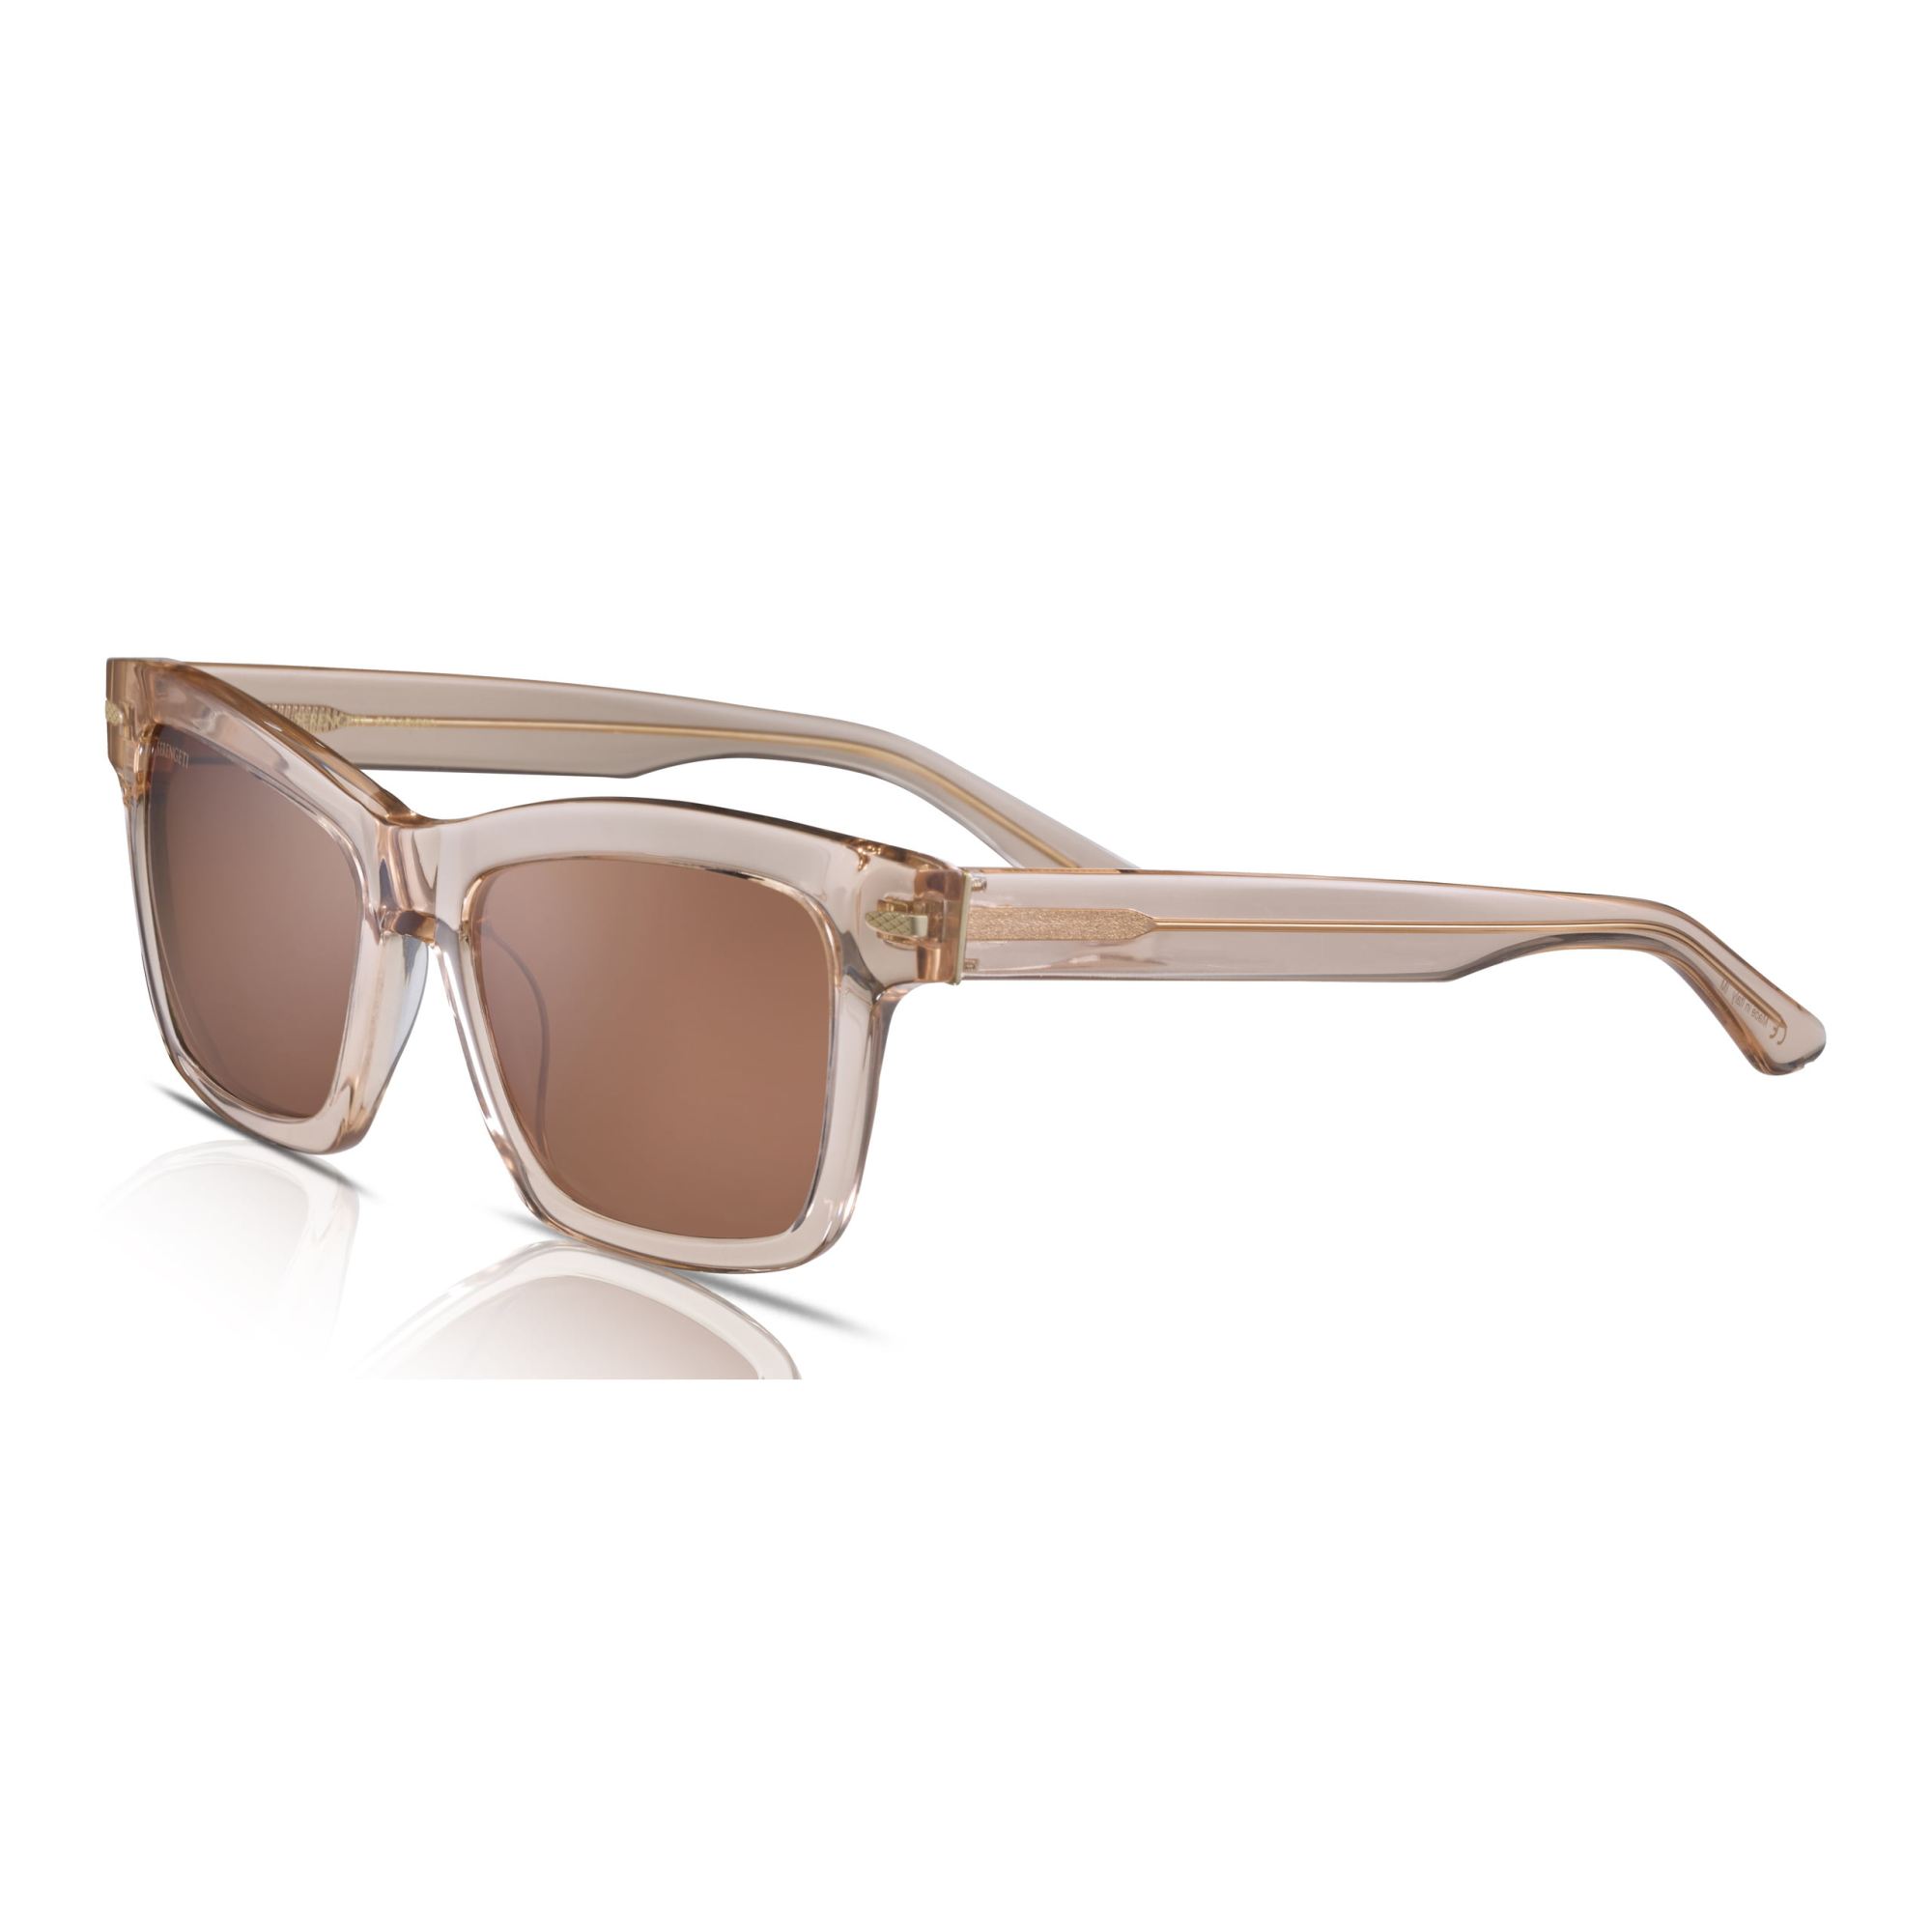 SS528004 Winona Pink Champagne Mineral Polarized Drivers 01 Ed